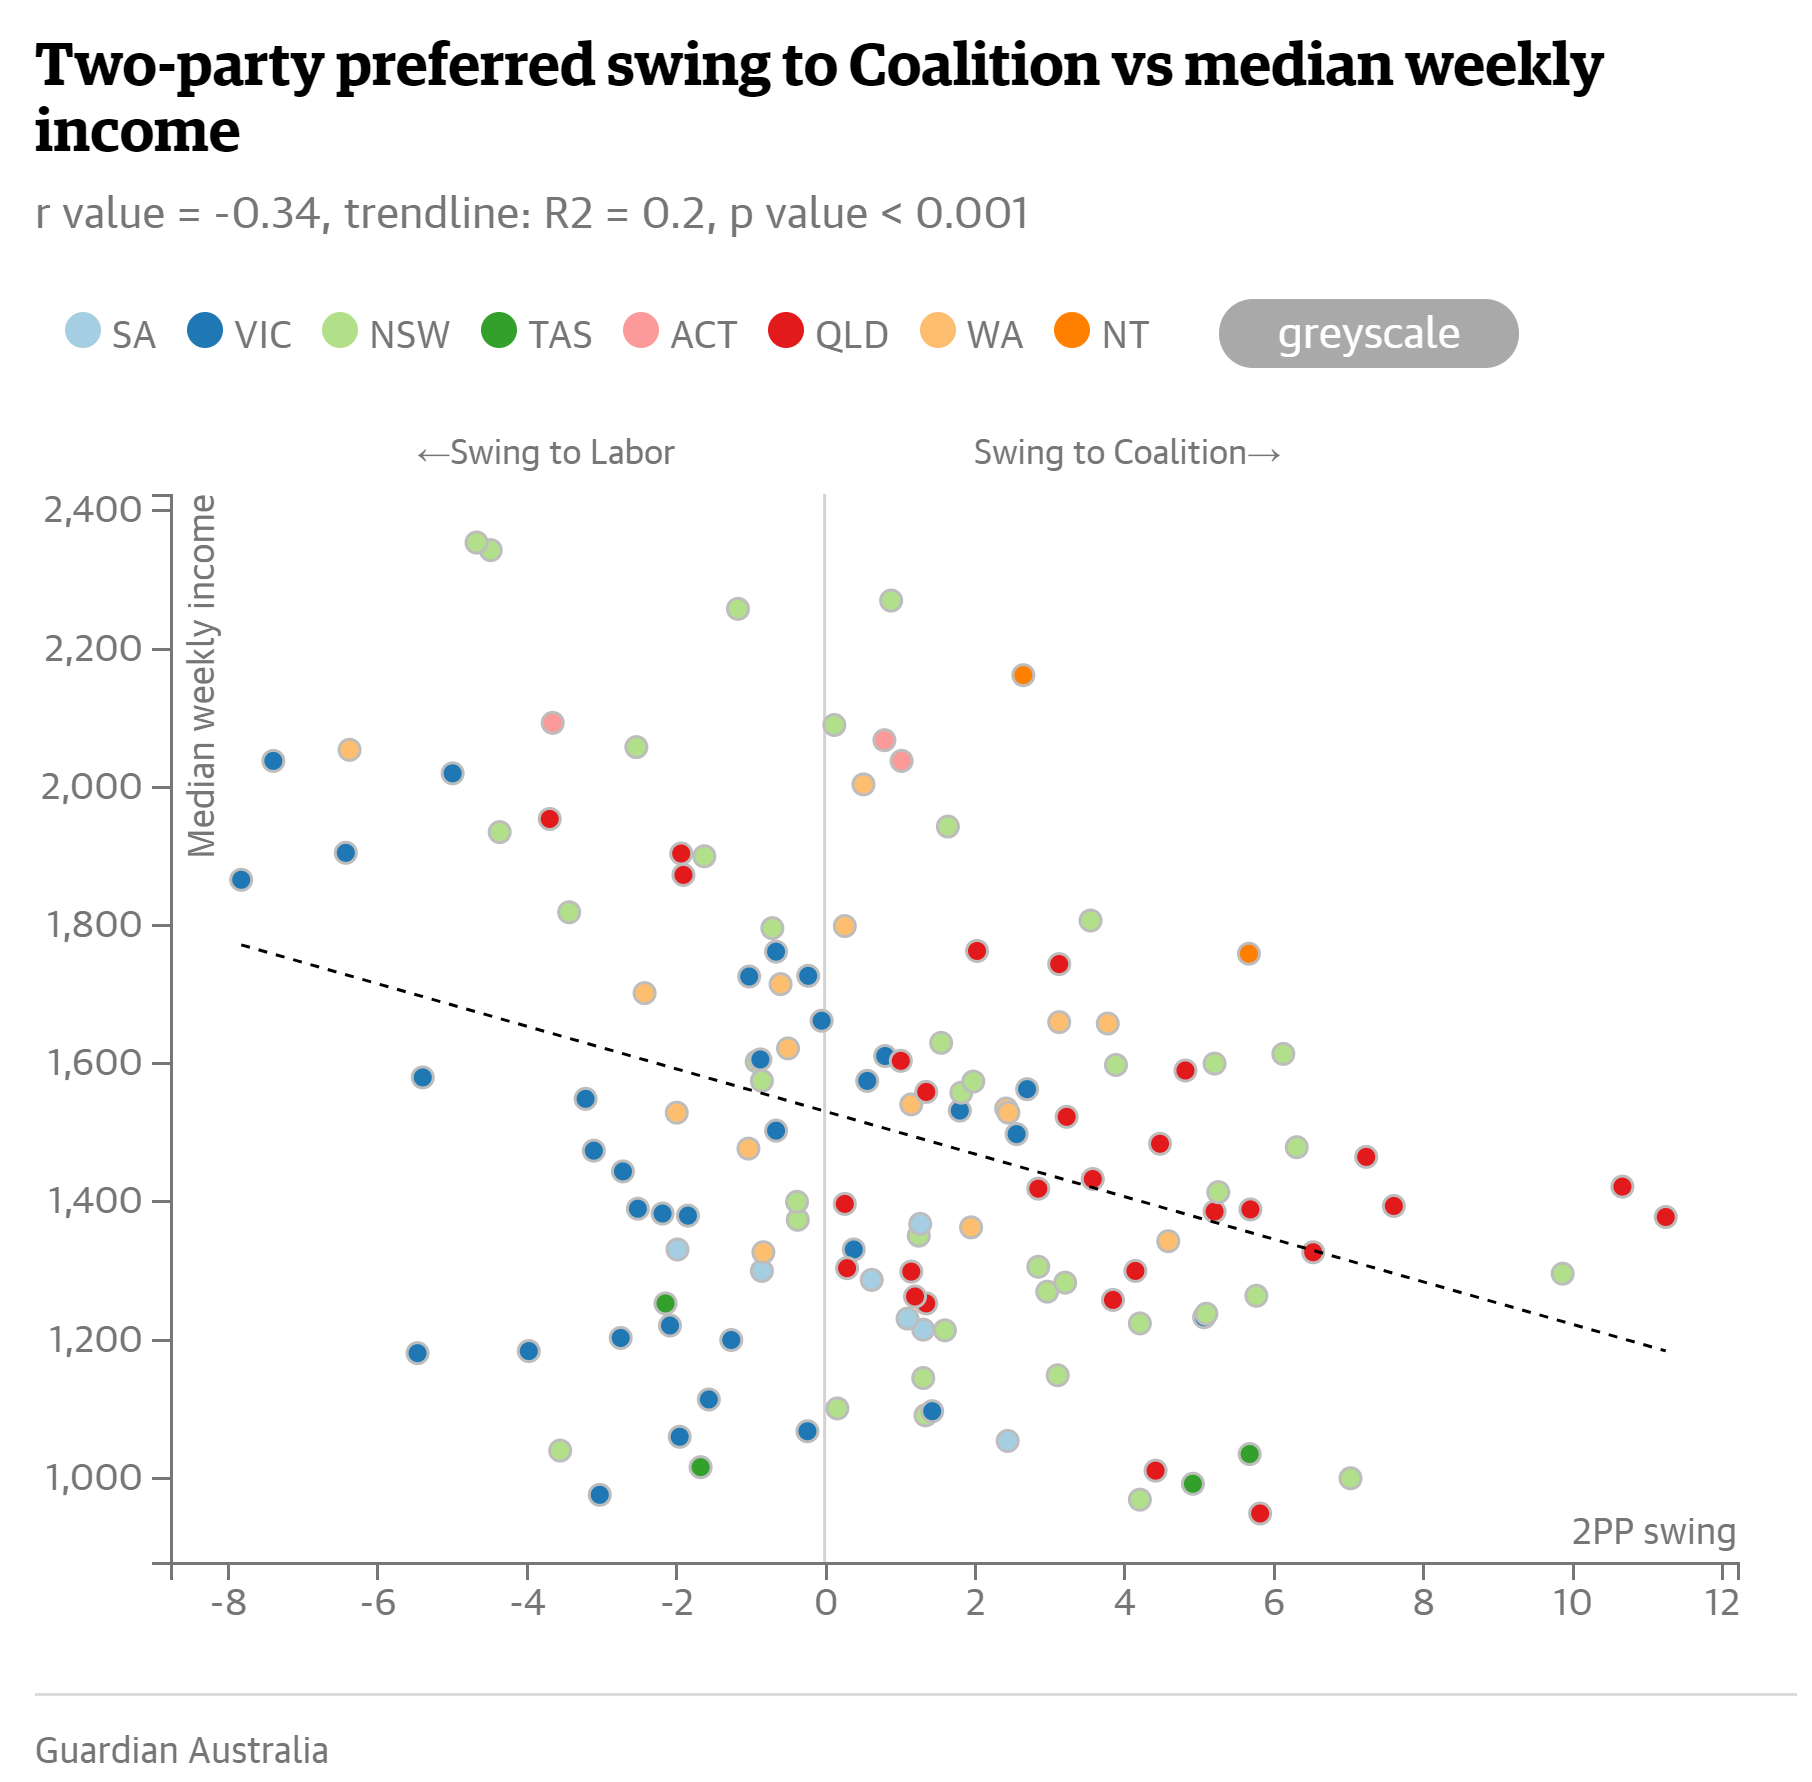 Two-party preferred swing to Coalition vs median weekly income.